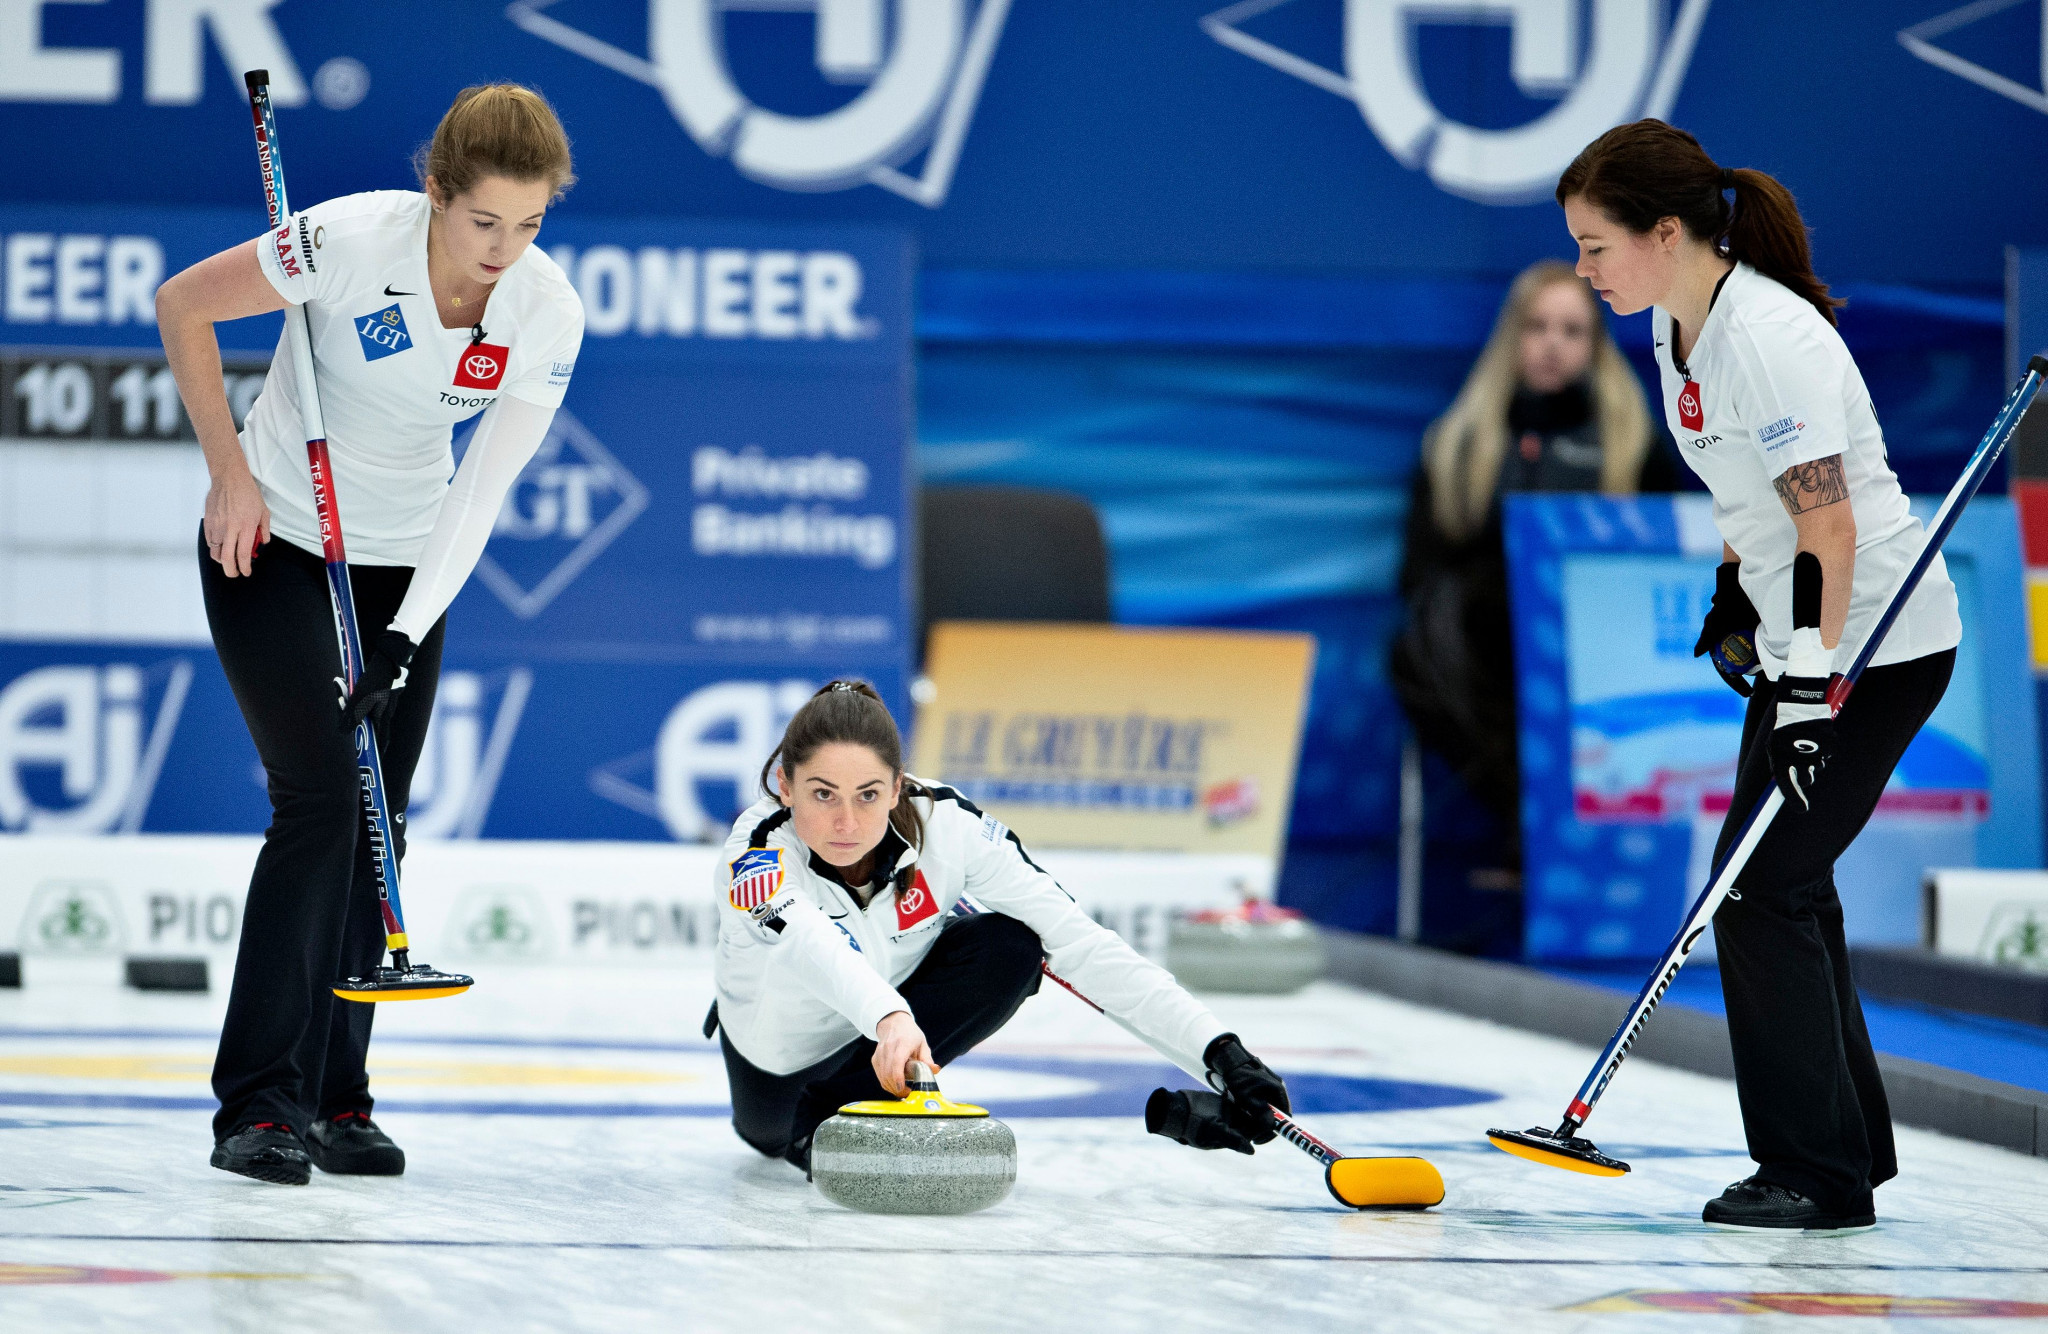 USA Curling has named Franklin Group as their official printing and promotions partner ©Getty Images 